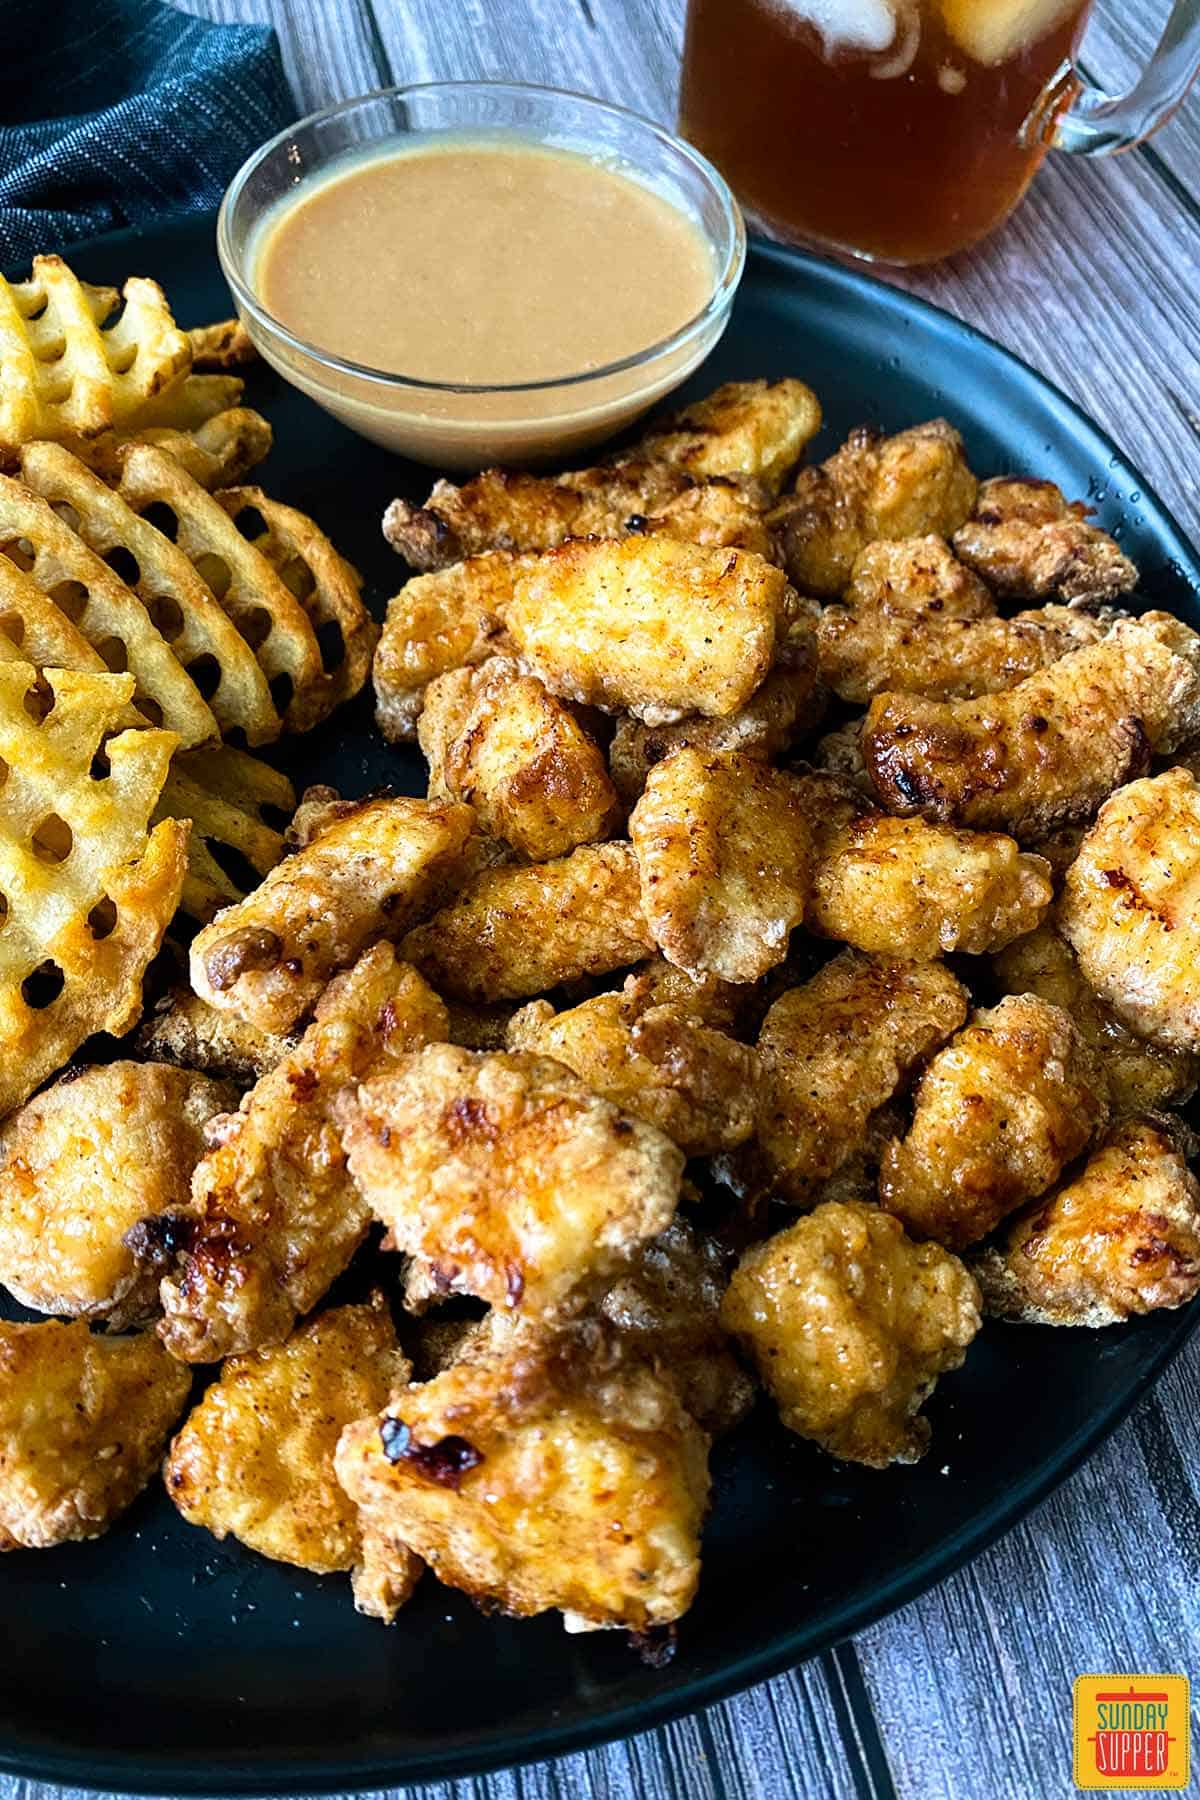 Up close air fryer chick-fil-a nuggets on a black plate with waffle fries and chick-fil-a sauce in a cup